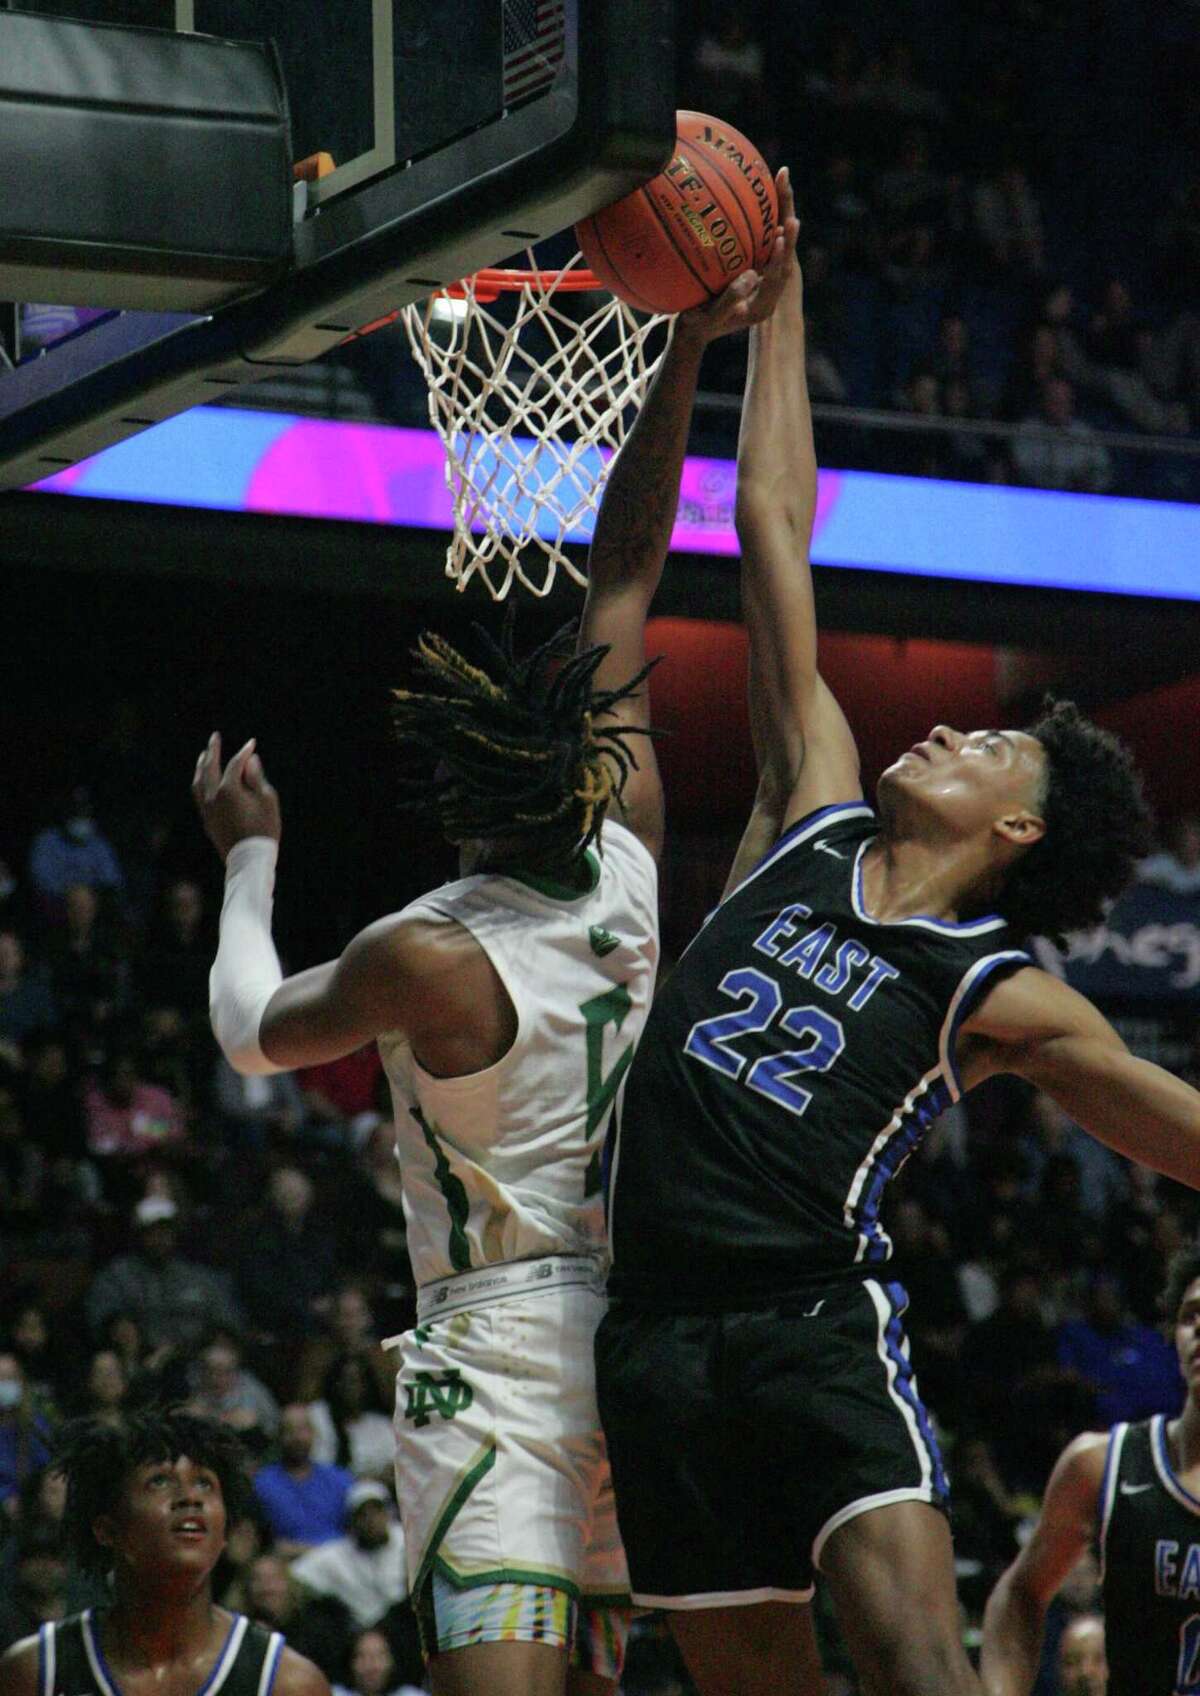 James Jones goes up for a blocked shot for East Catholic defeated Notre Dame-West Haven 50-49 in the CIAC 2022 State Boys Basketball Tournament Division I Finals at the Mohegan Sun Arena on March 20, 2022 in Uncasville, Connecticut.